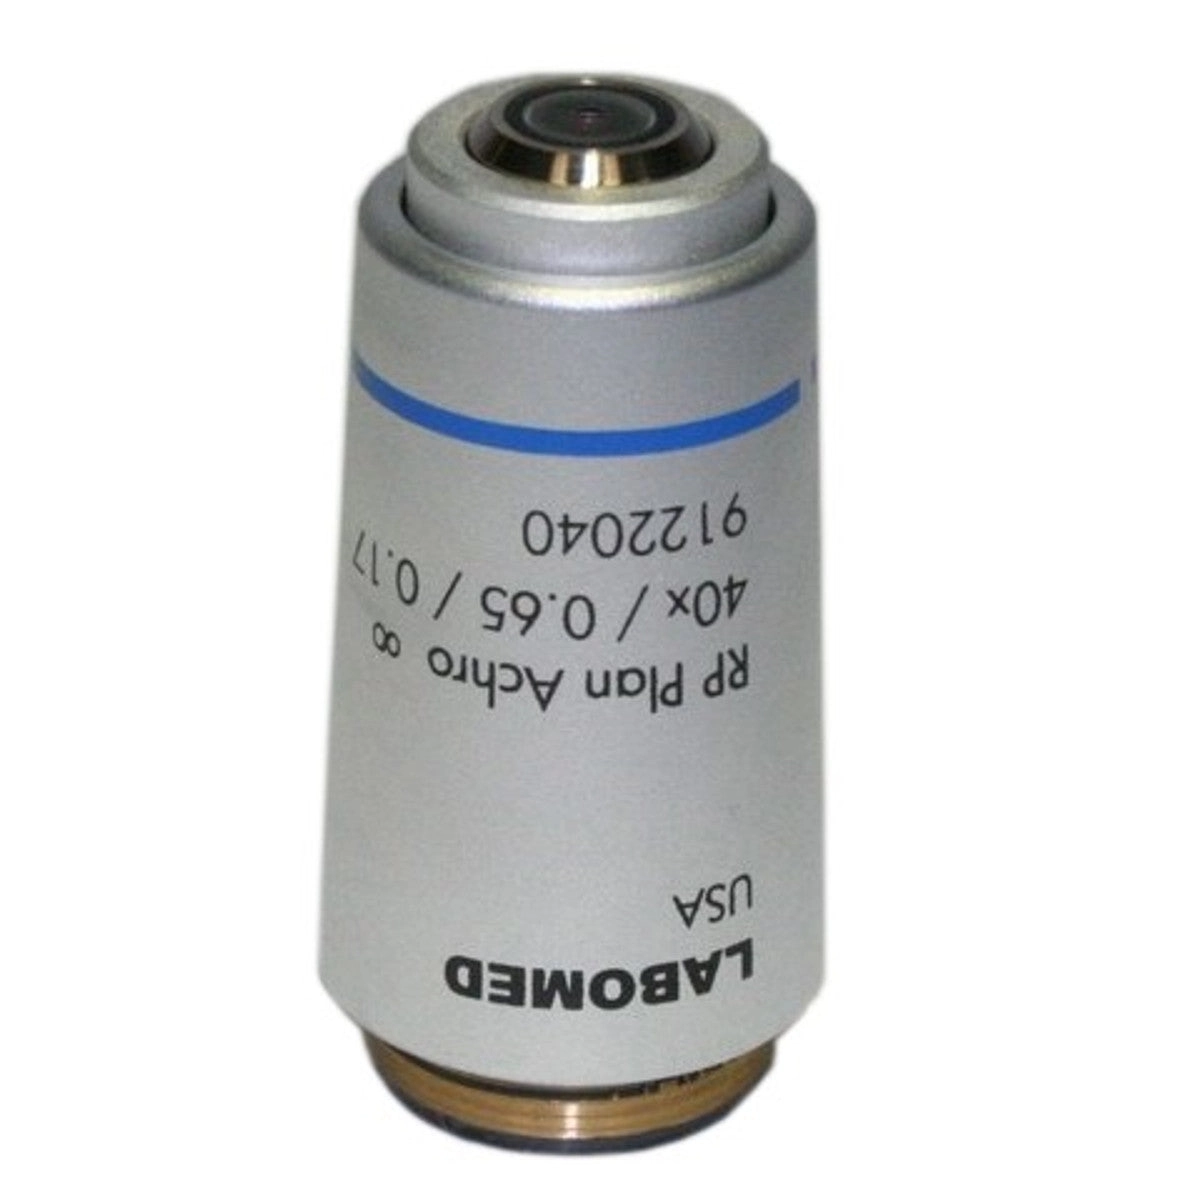 Labomed 40x Infinity Plan Achromatic Objective for Lx400 | 9122040